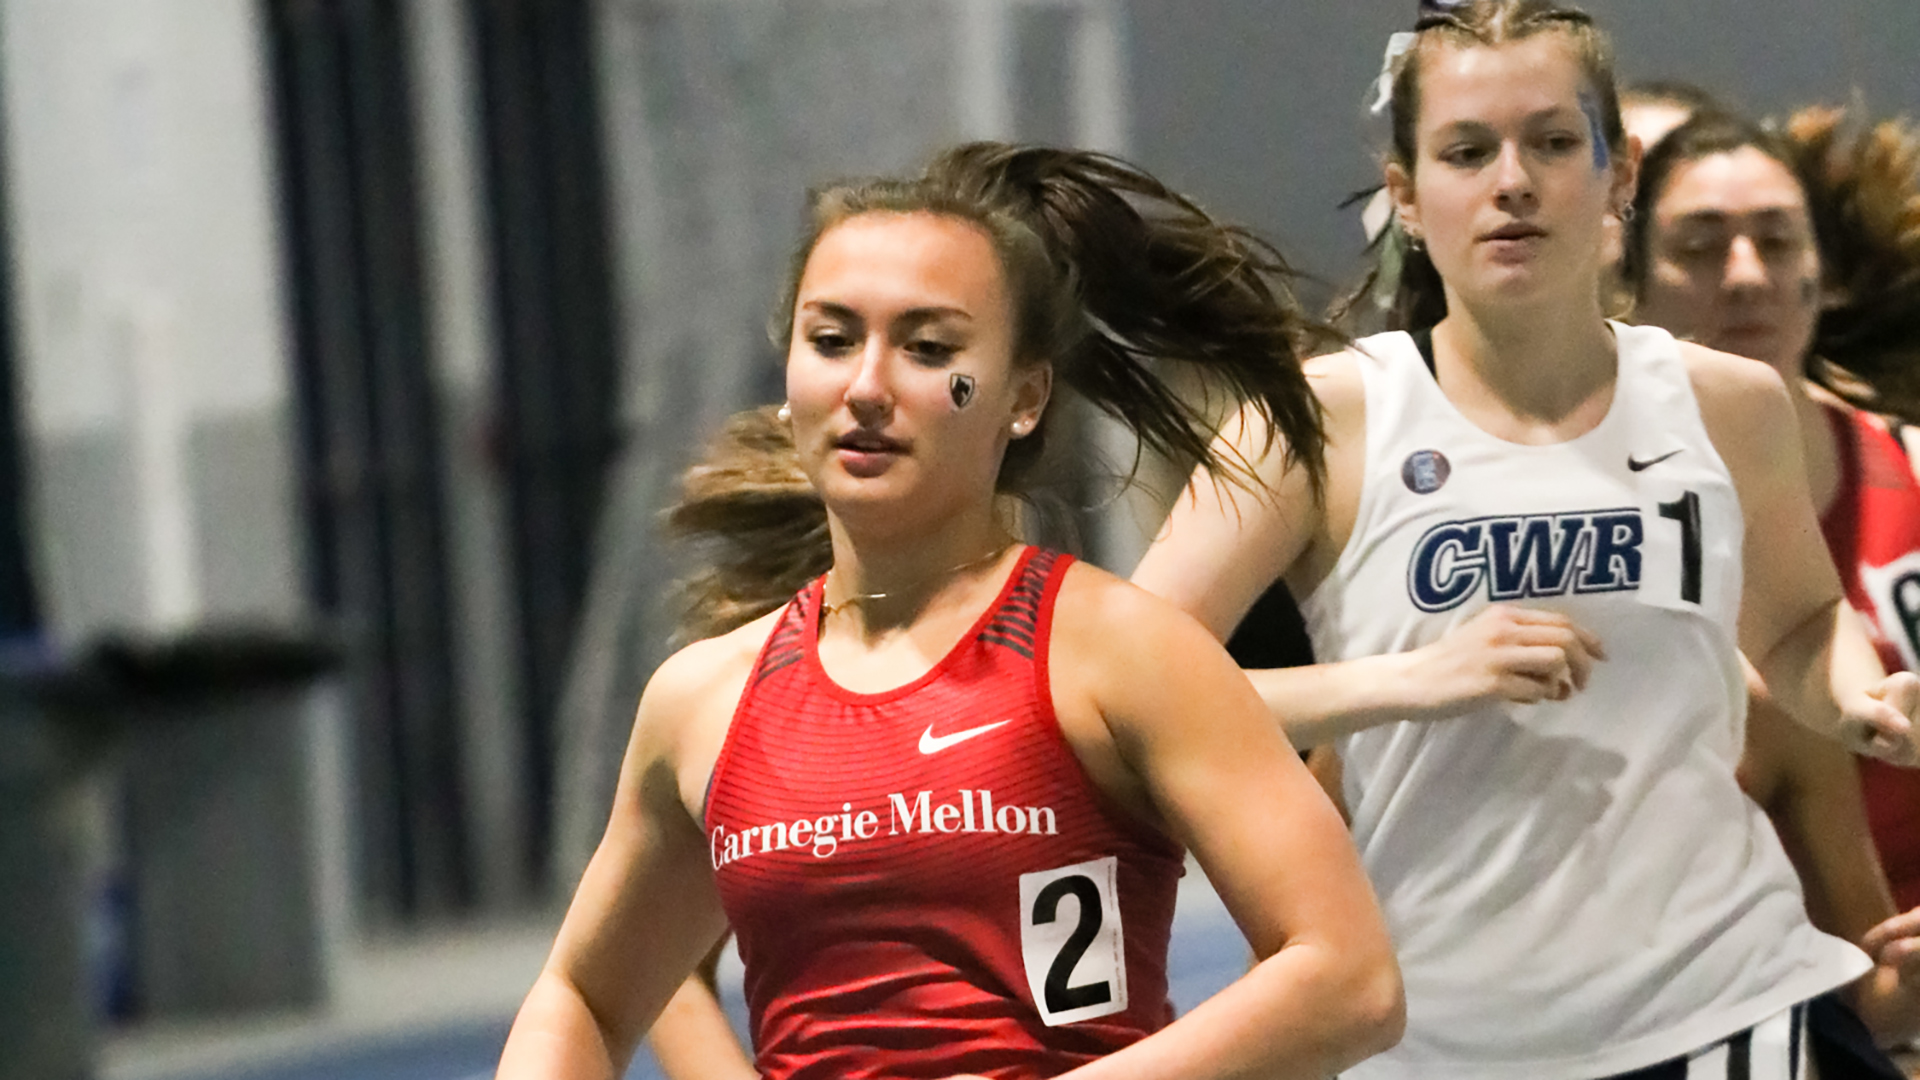 women's track runner wearing a red jersey top races in front of others